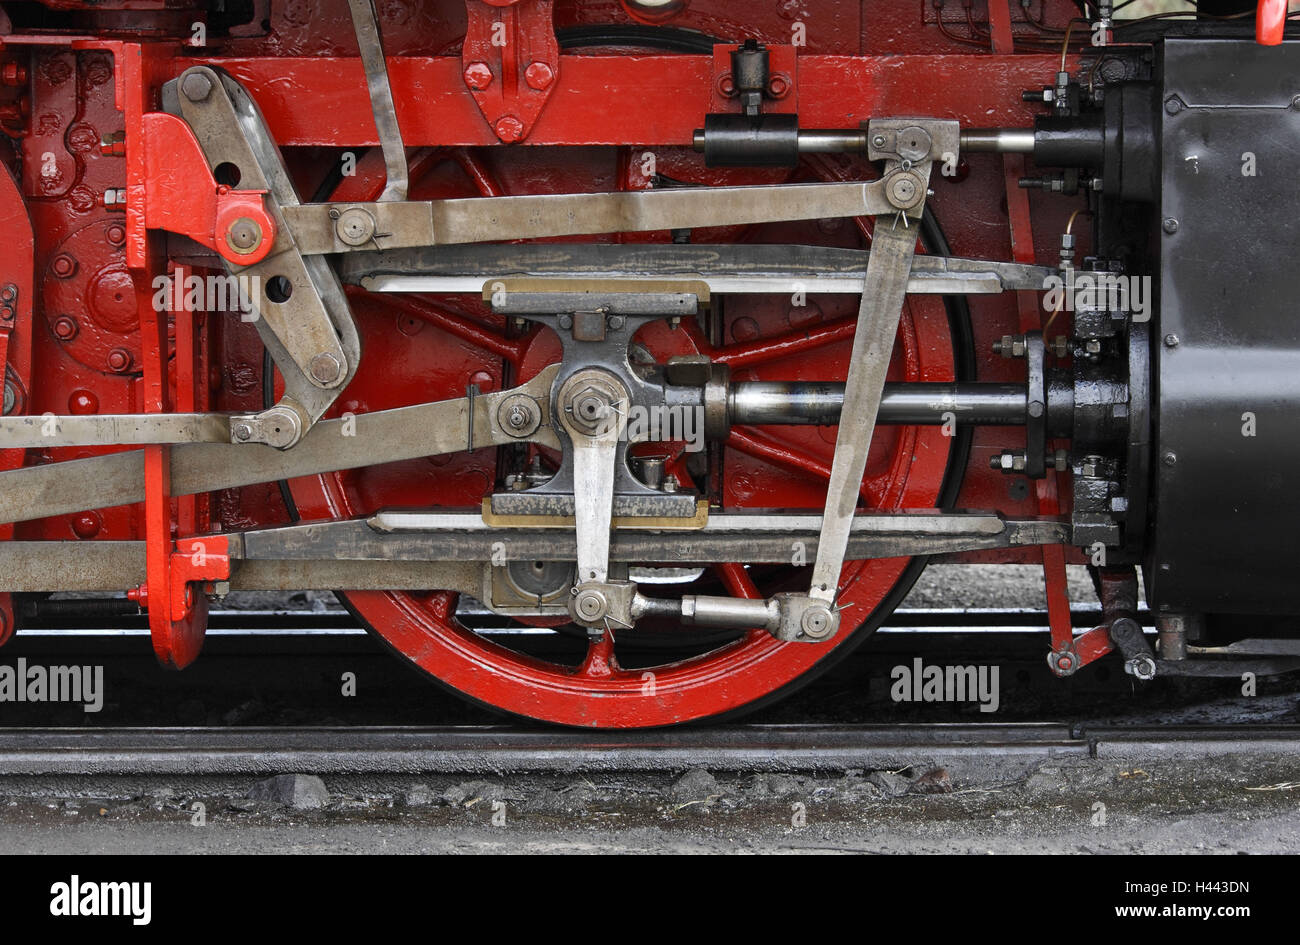 Steam locomotive, 99 5901, year manufacture in 1897, engine, resinous-across trajectory and lump trajectory, Stock Photo